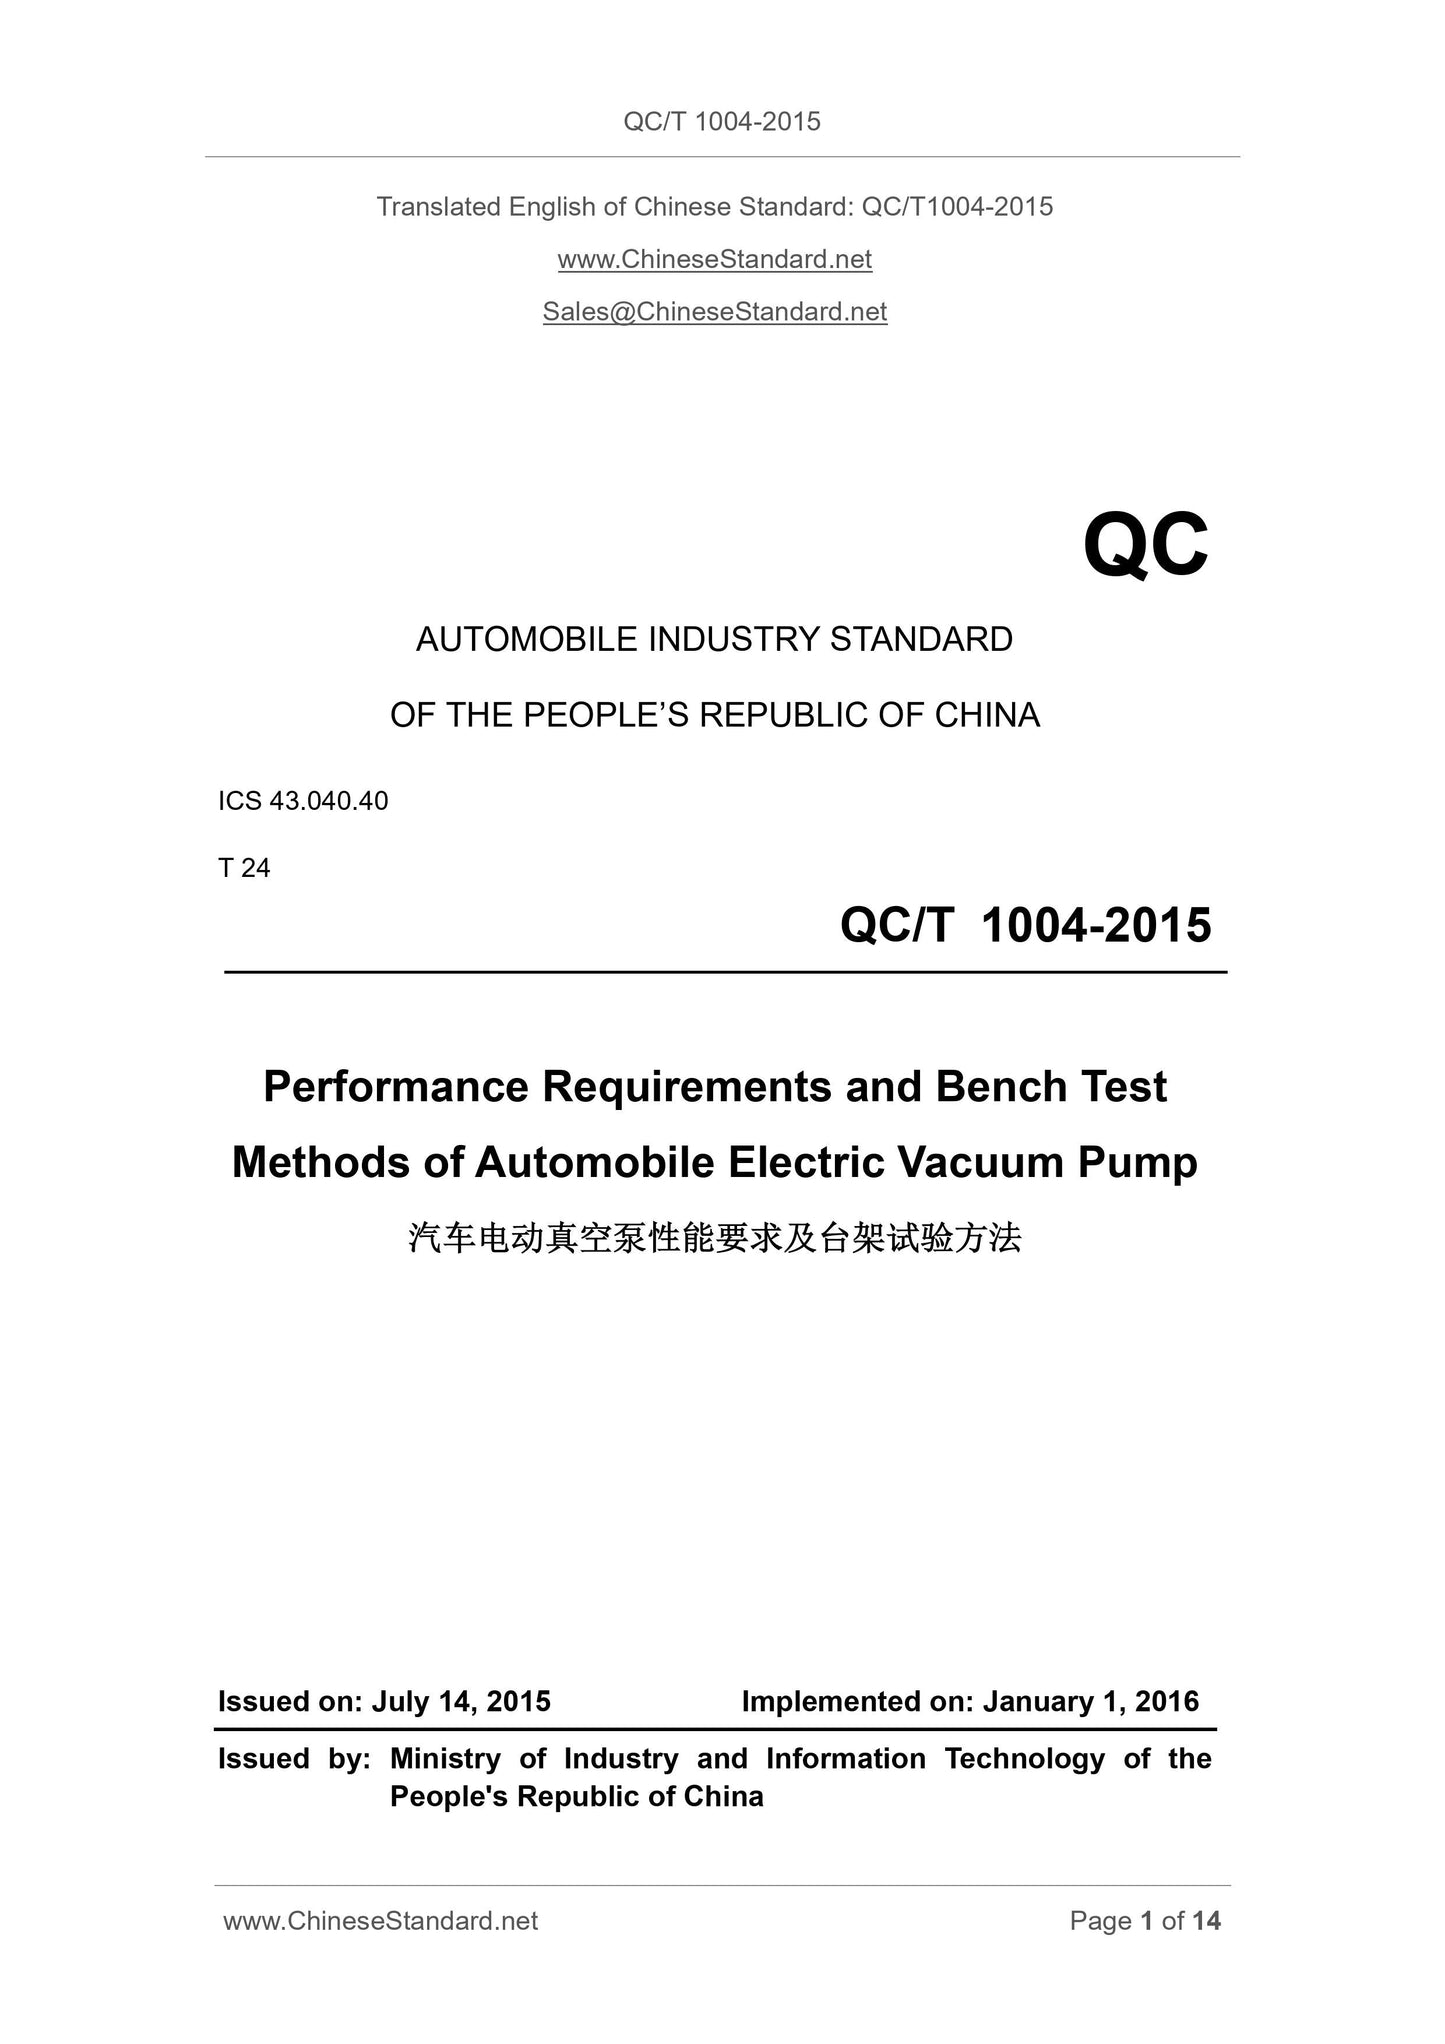 QC/T 1004-2015 Page 1